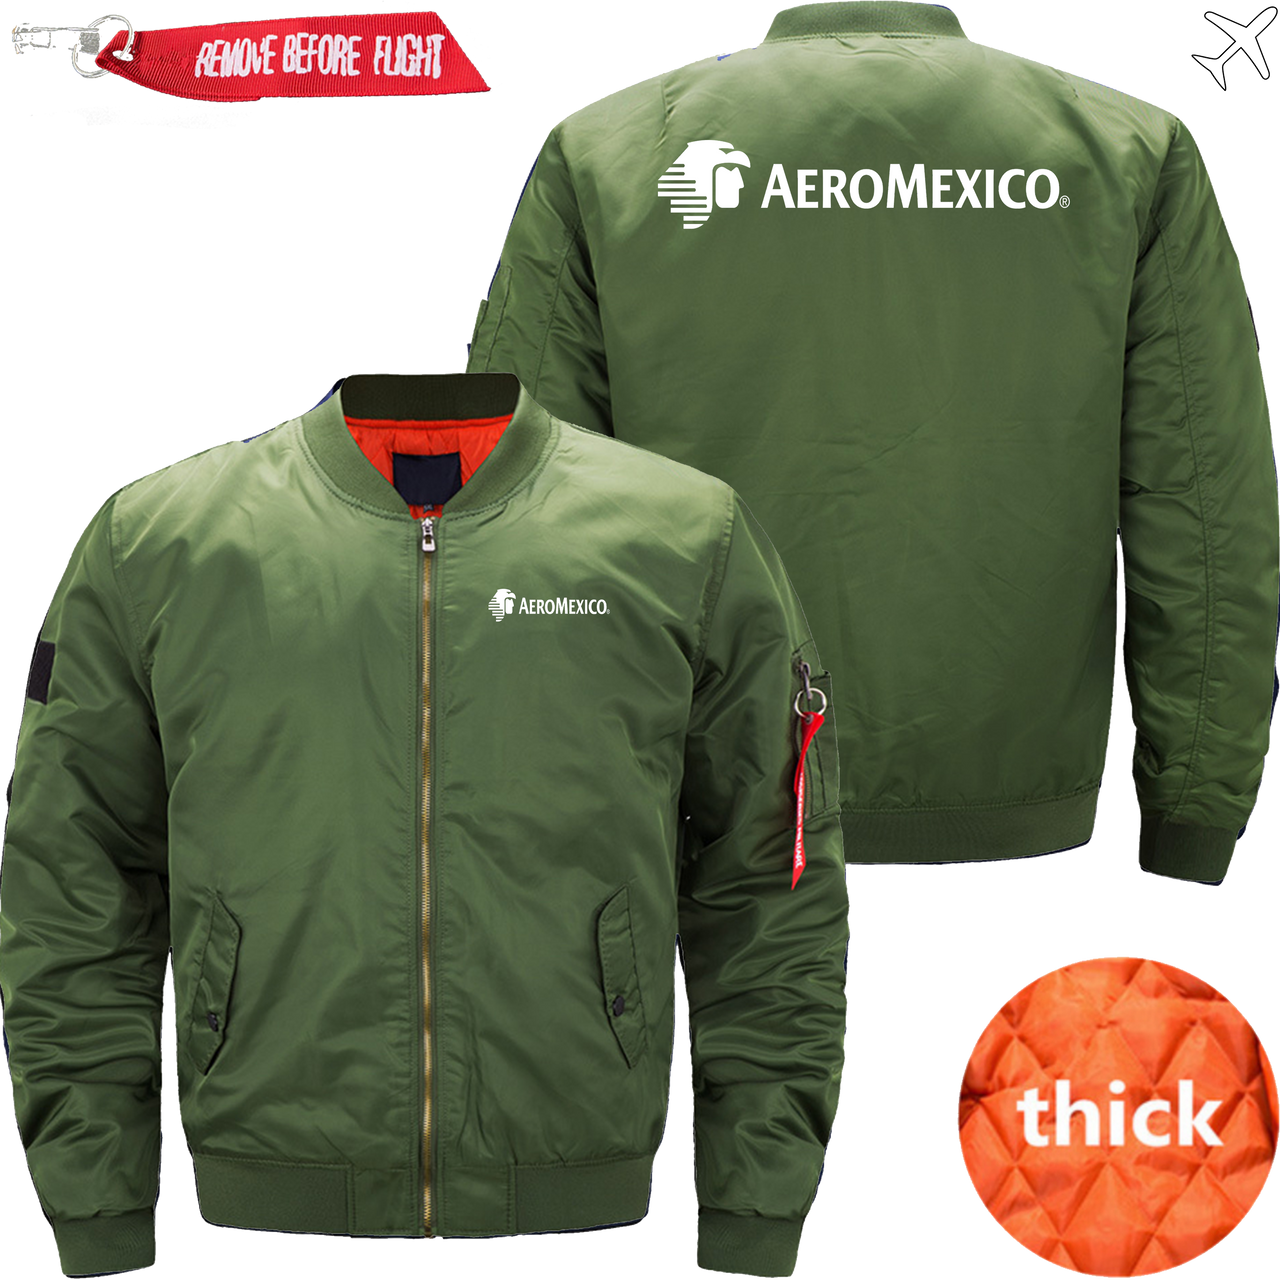 MEXICO AIRLINES MA1 JACKET THE AV8R